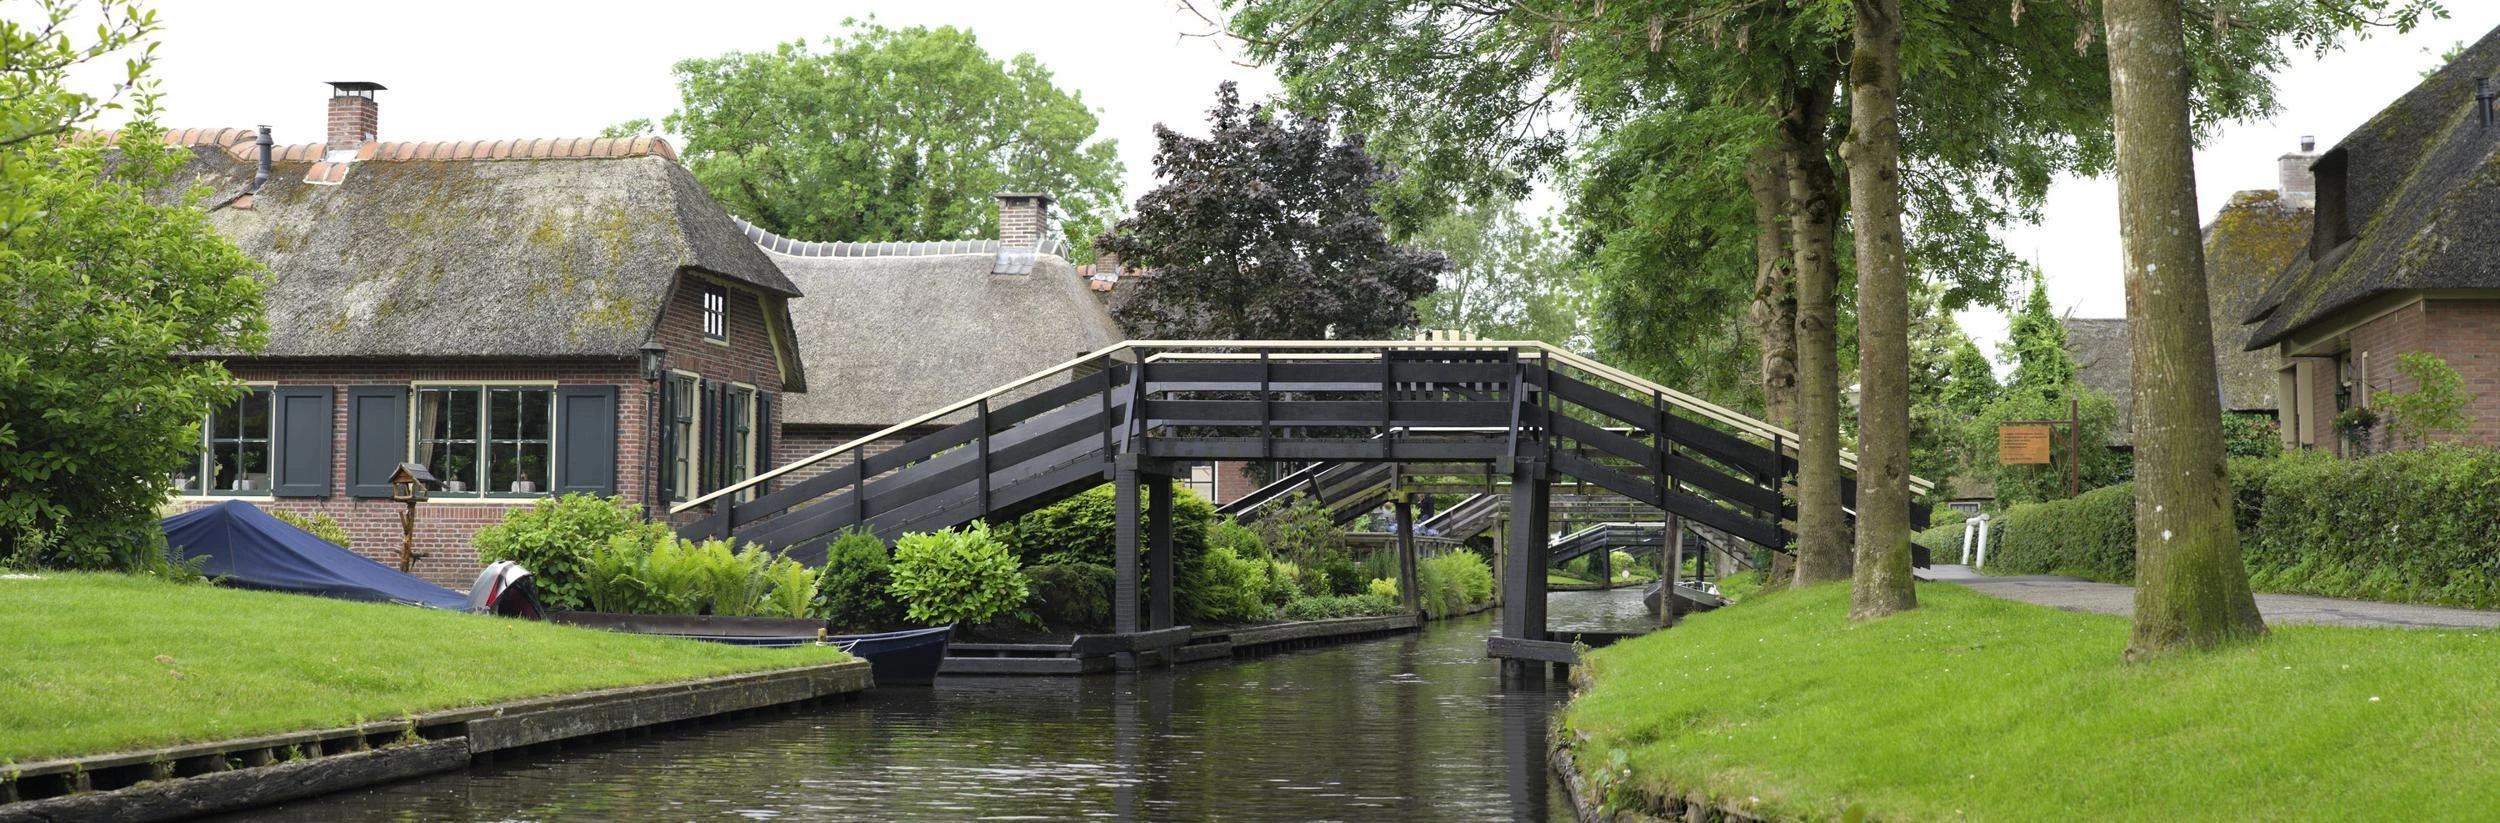 WELCOME TO GIETHOORN